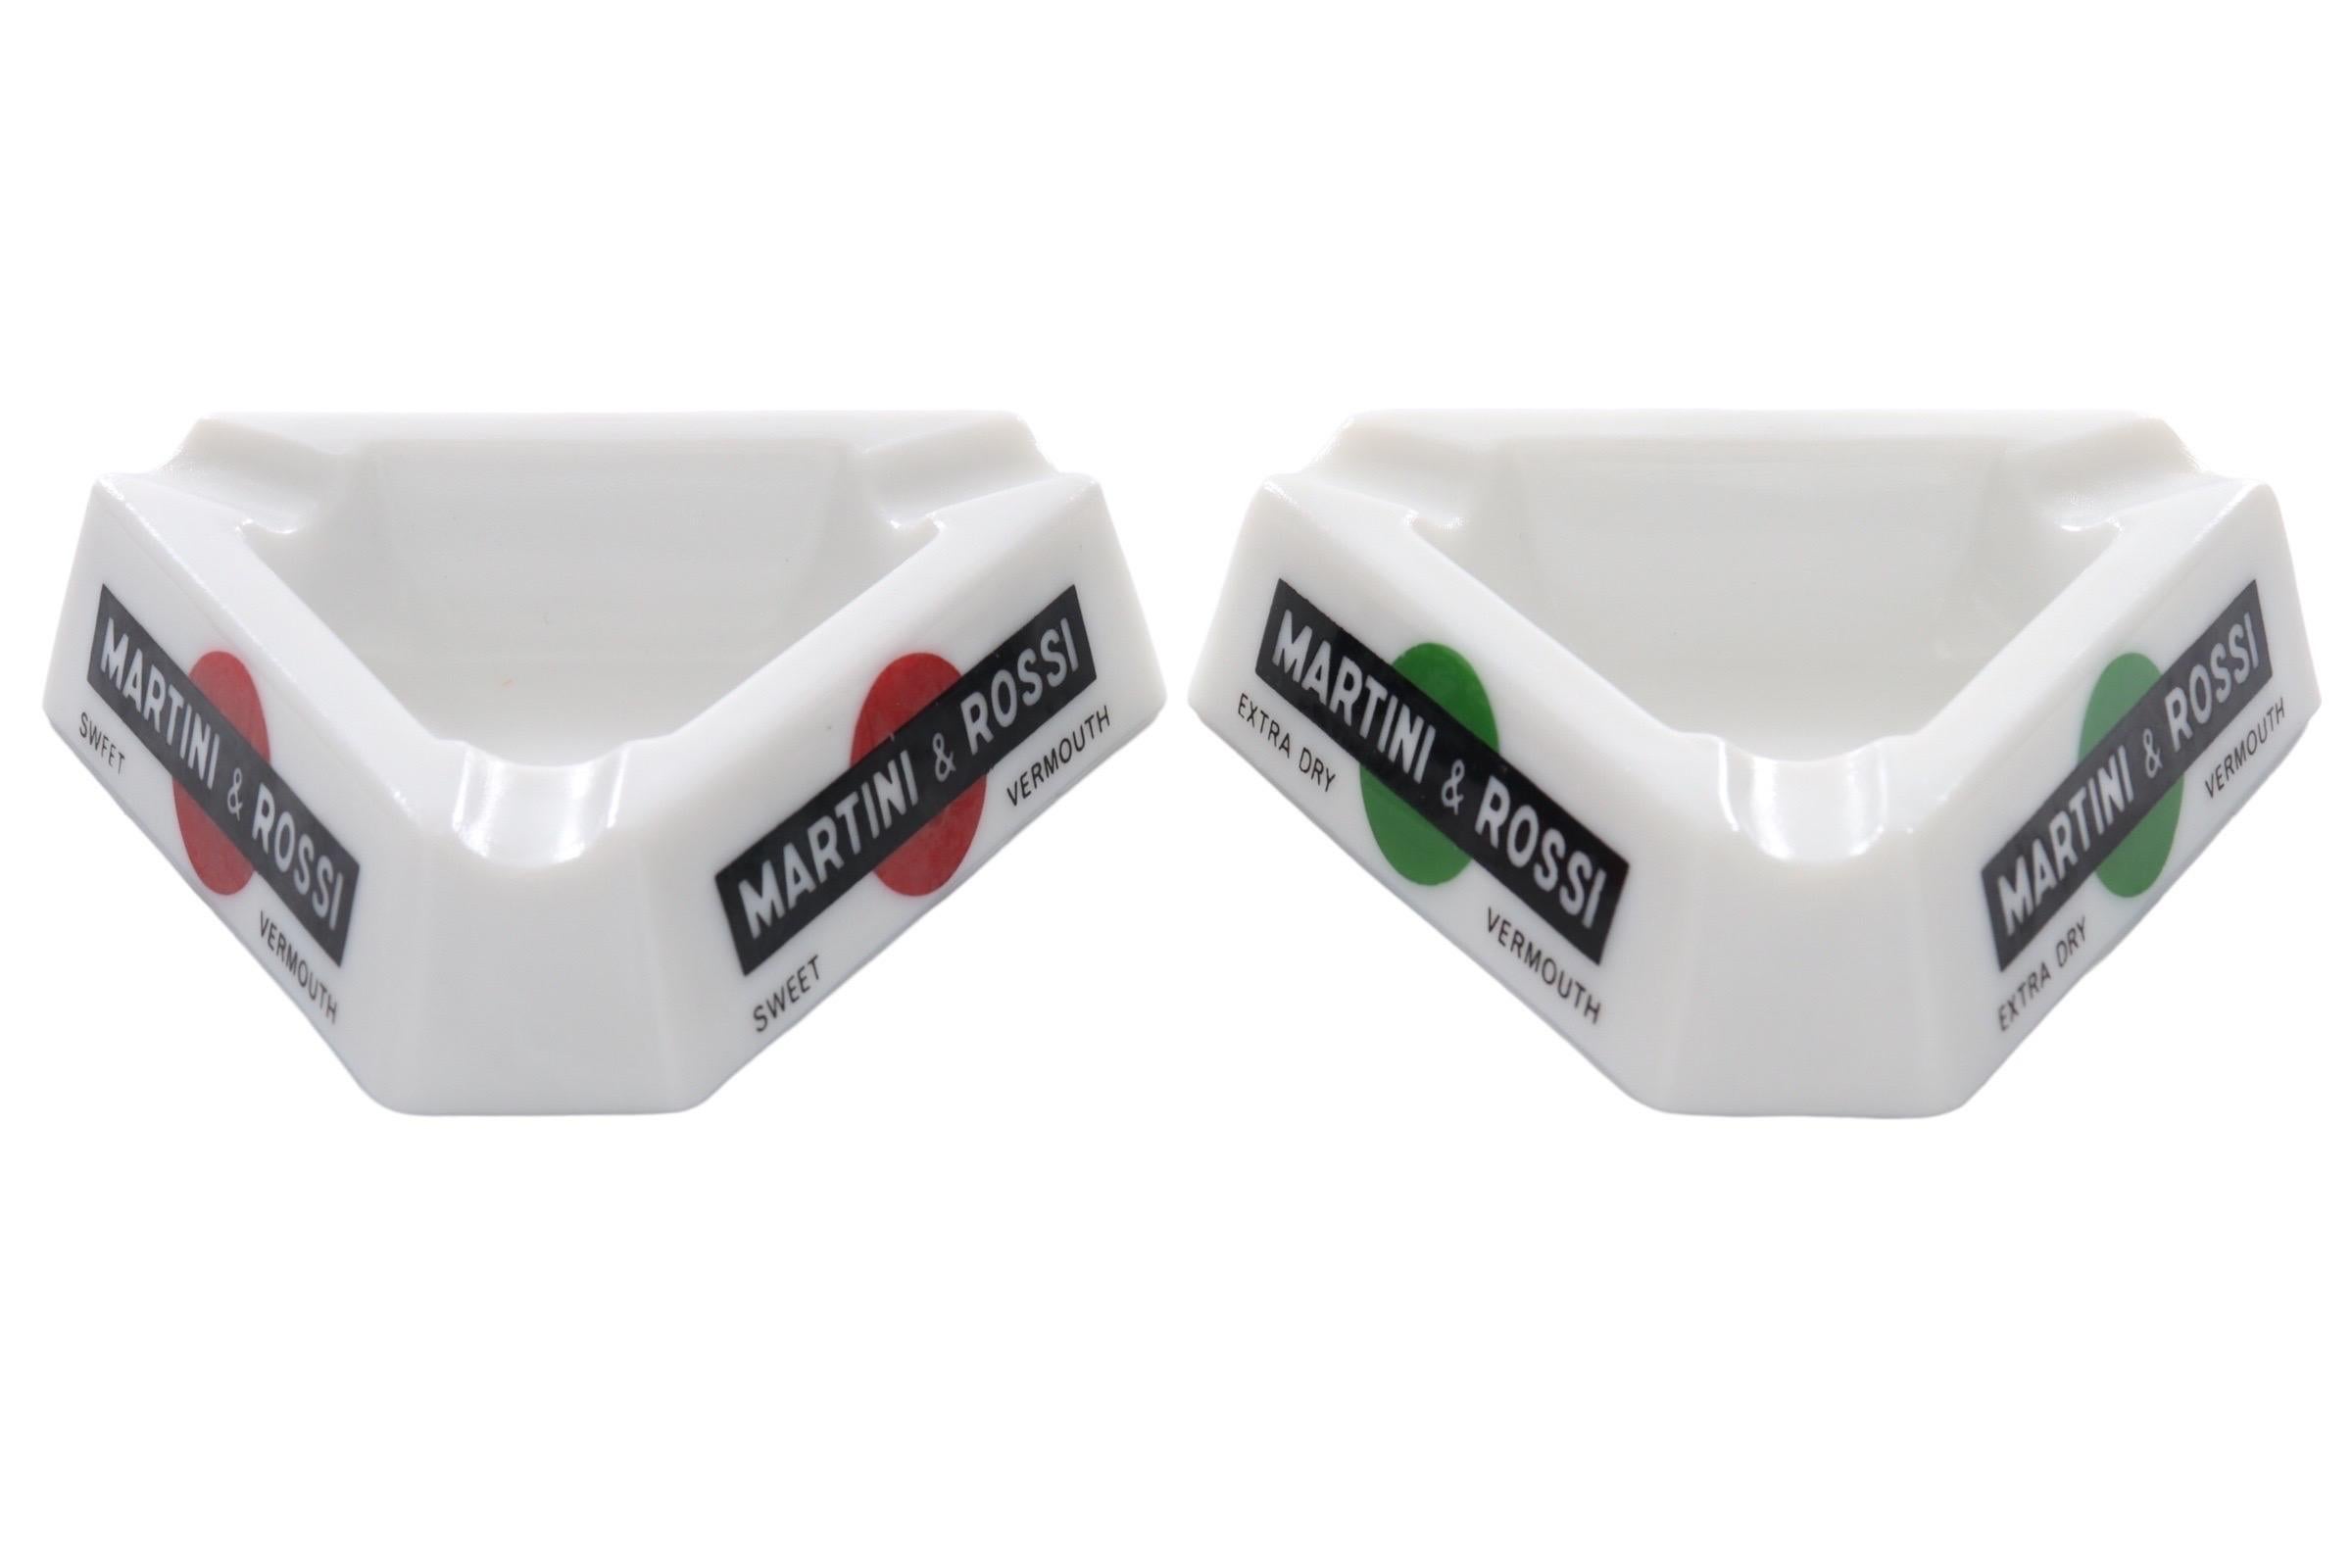 A pair of French Martini & Rossi triangular ashtrays. White opalex is branded Martini & Rossi Extra Dry and Sweet Vermouth on each side. Each corner has a beveled cigarette rest. Marked “Made in France, Renfield Importers, New York, NY” underneath.